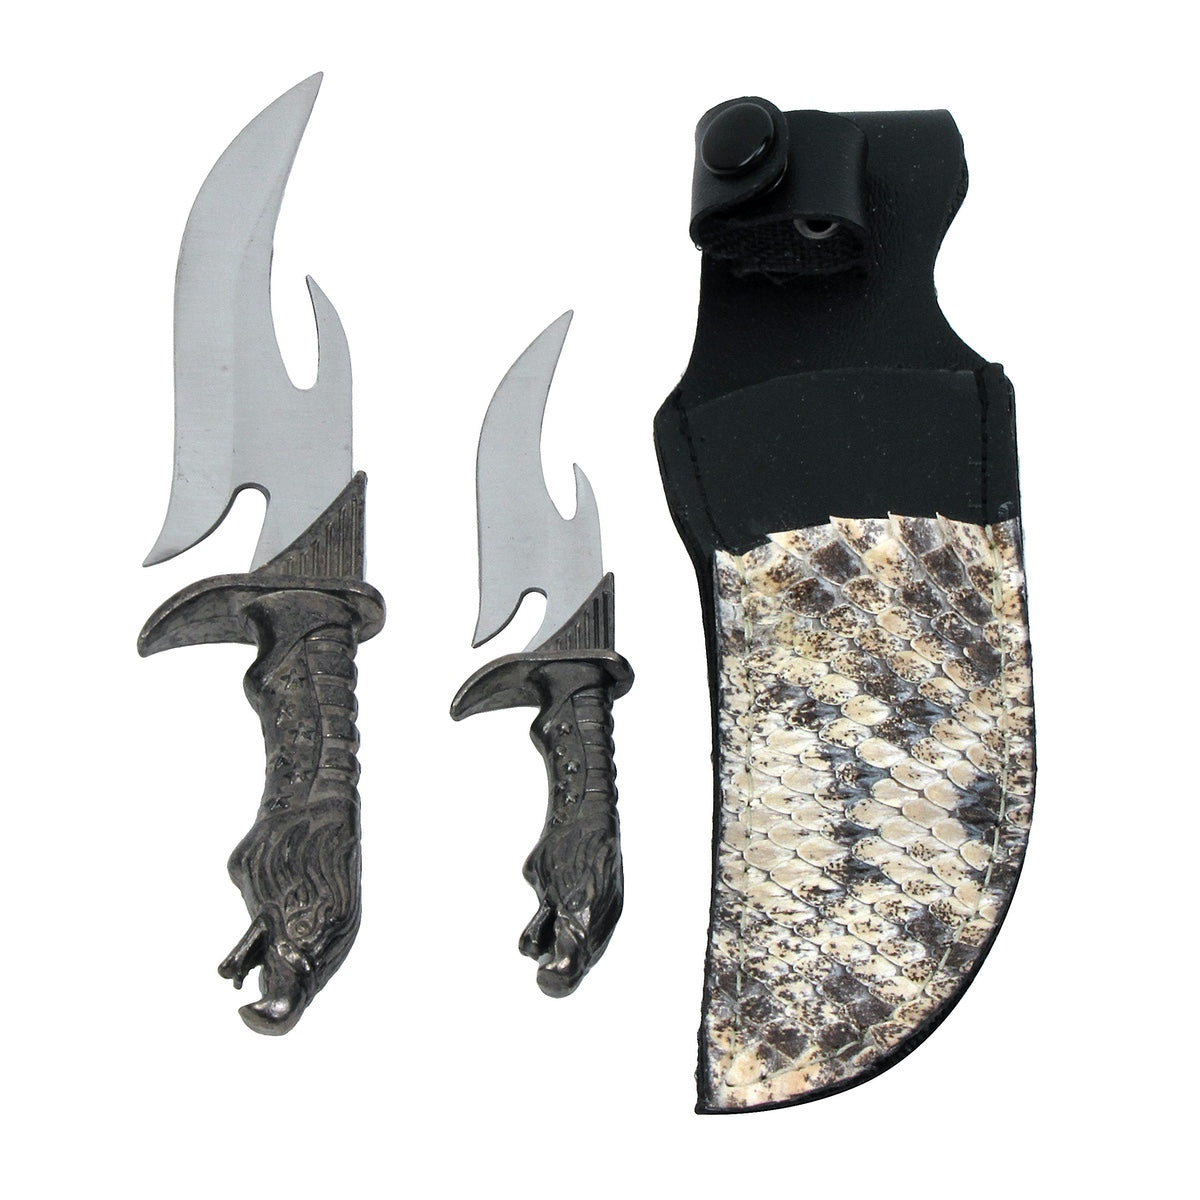 Treasure Gurus Stainless Steel Blue Dive Knife with Sheath Arm or Leg Straps and Line Cutter